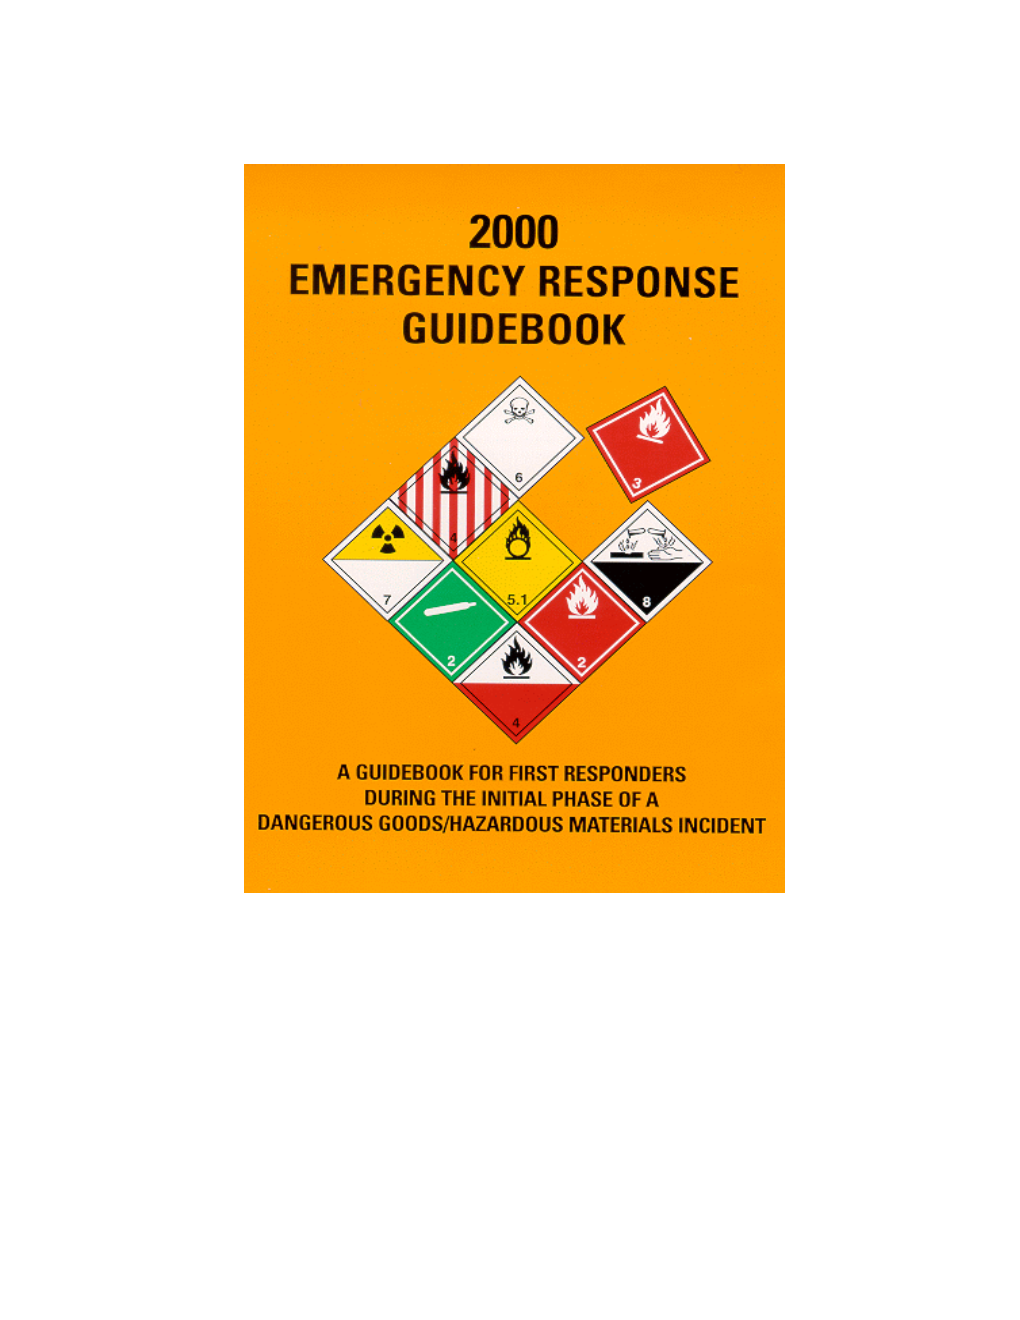 Emergency Response Guidebook (ERG2000) Was Developed Jointly by Transport Canada (TC), the U.S